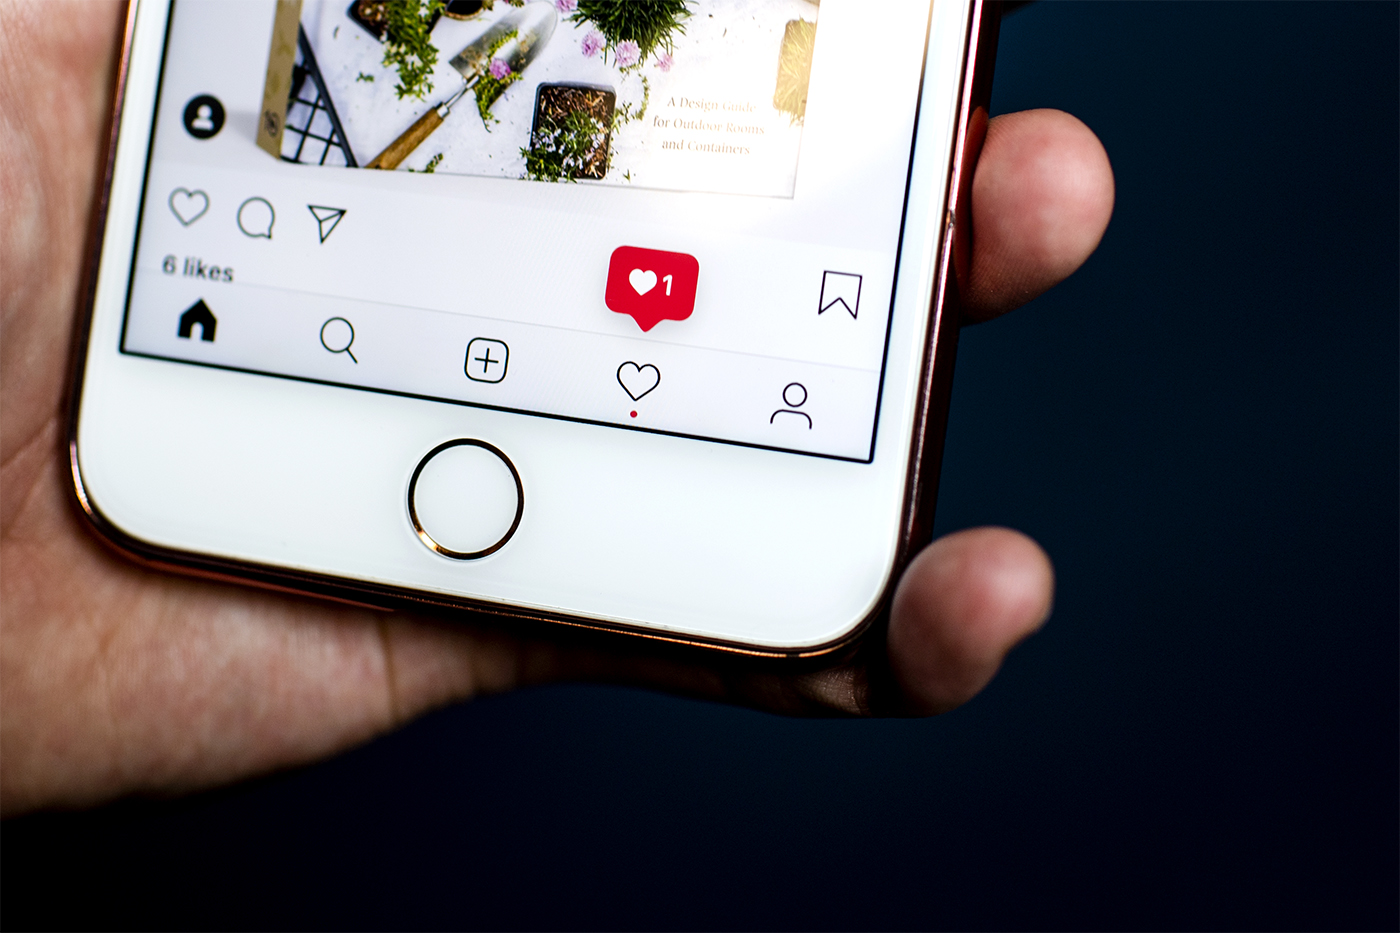 Instagram Tests Hiding Like Counts Will It Boost User Wellbeing or Kill Influencer Marketing?